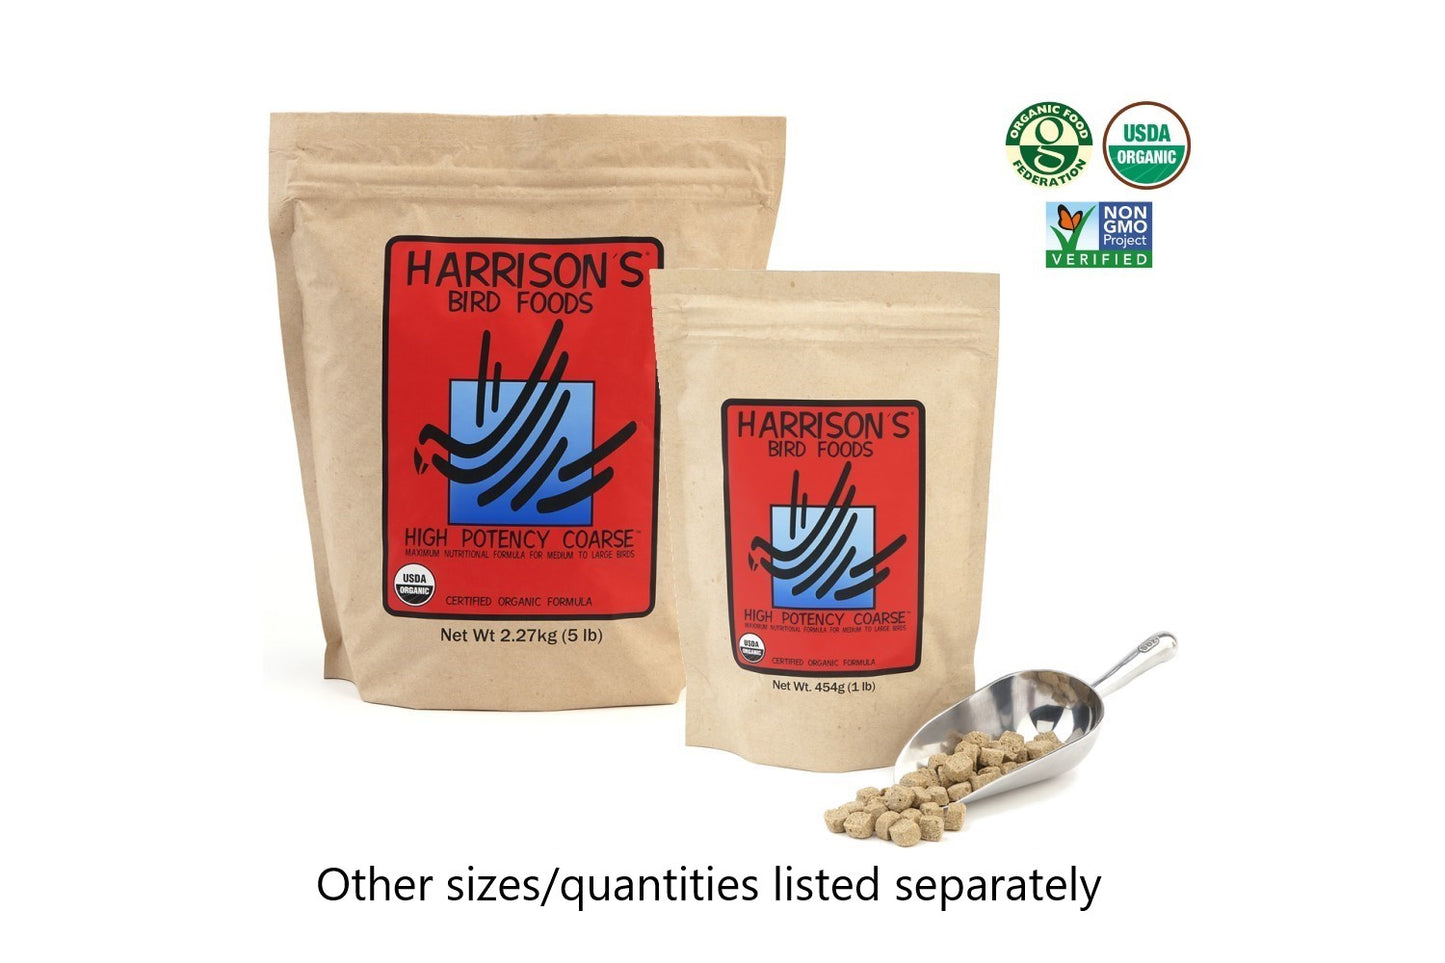 High Potency Coarse - reduced price